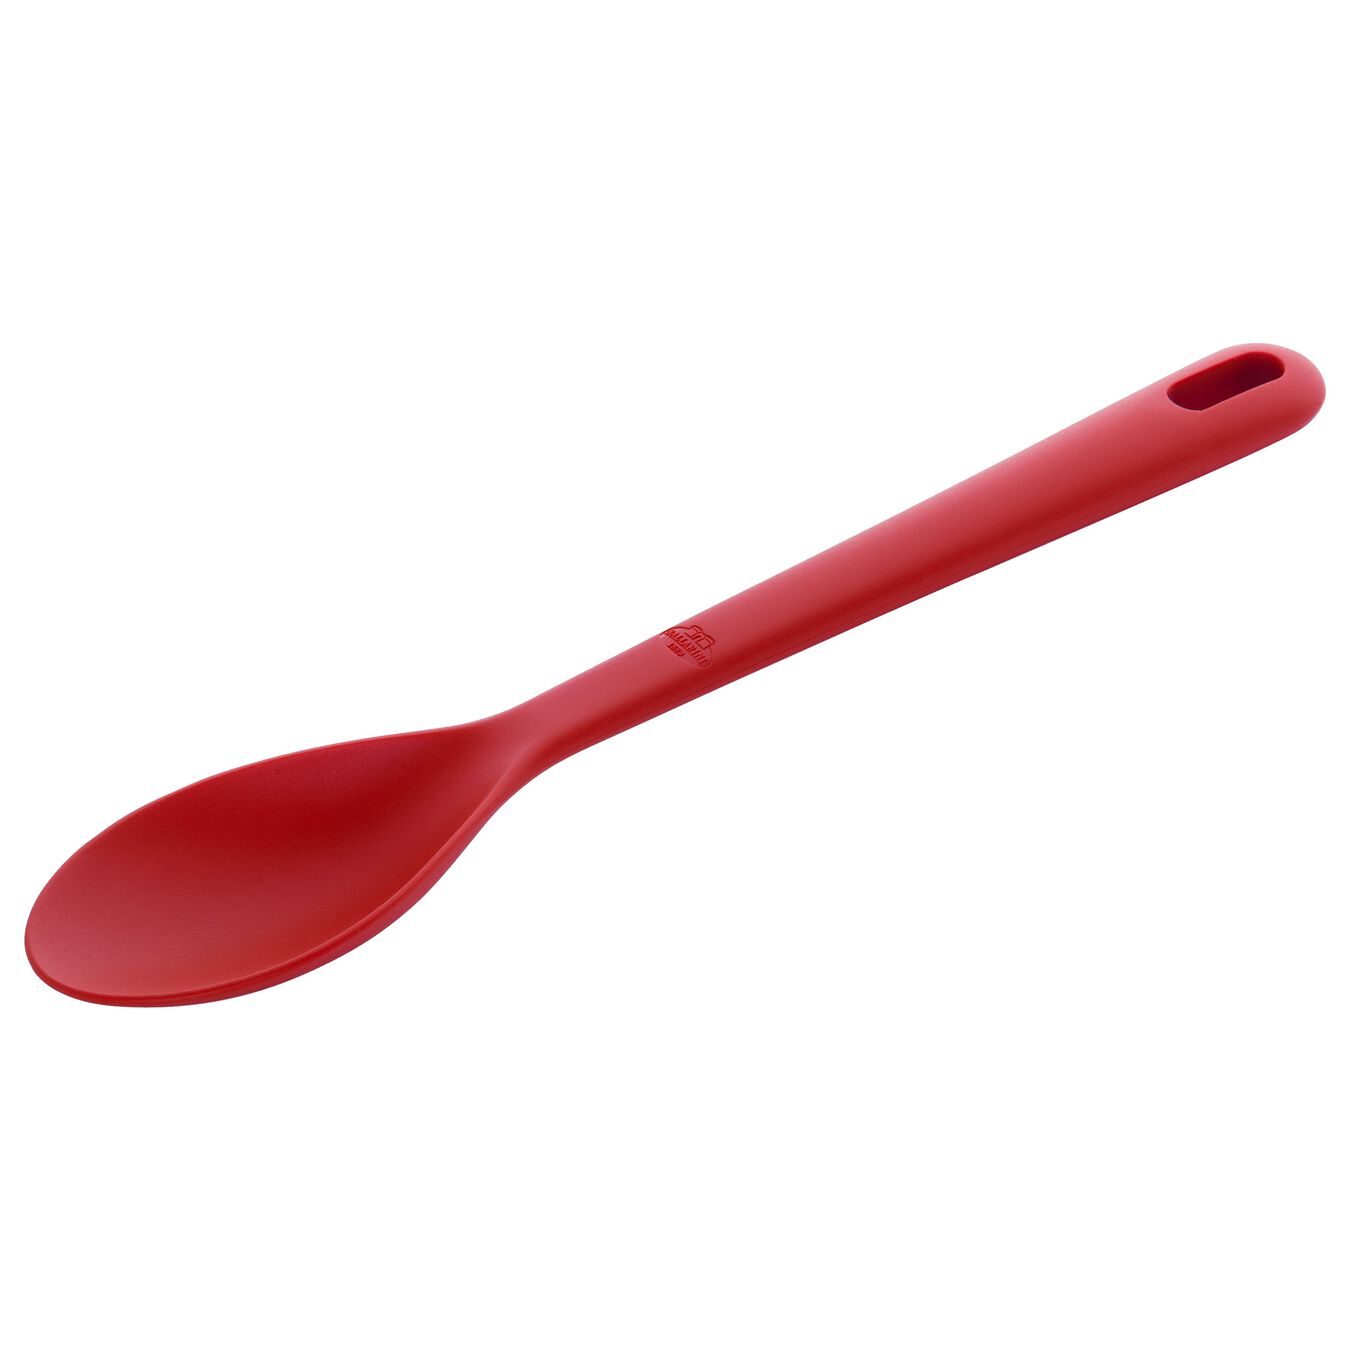 31 cm silicone Cooking spoon, red,,large 1